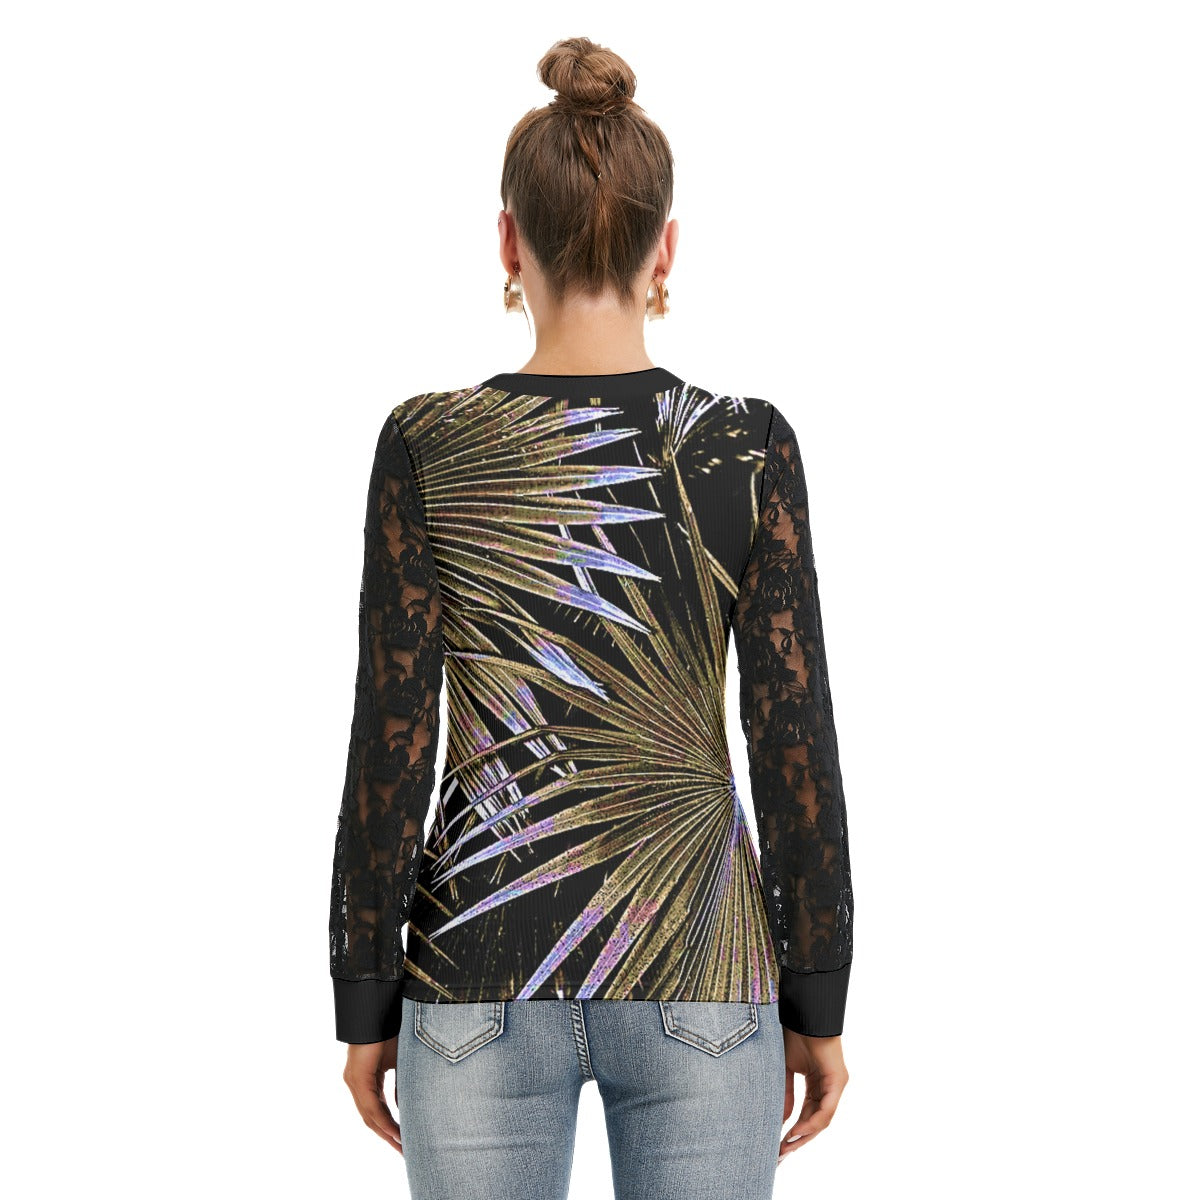 Purple Floral Women's T-shirt And Sleeve With Black Lace